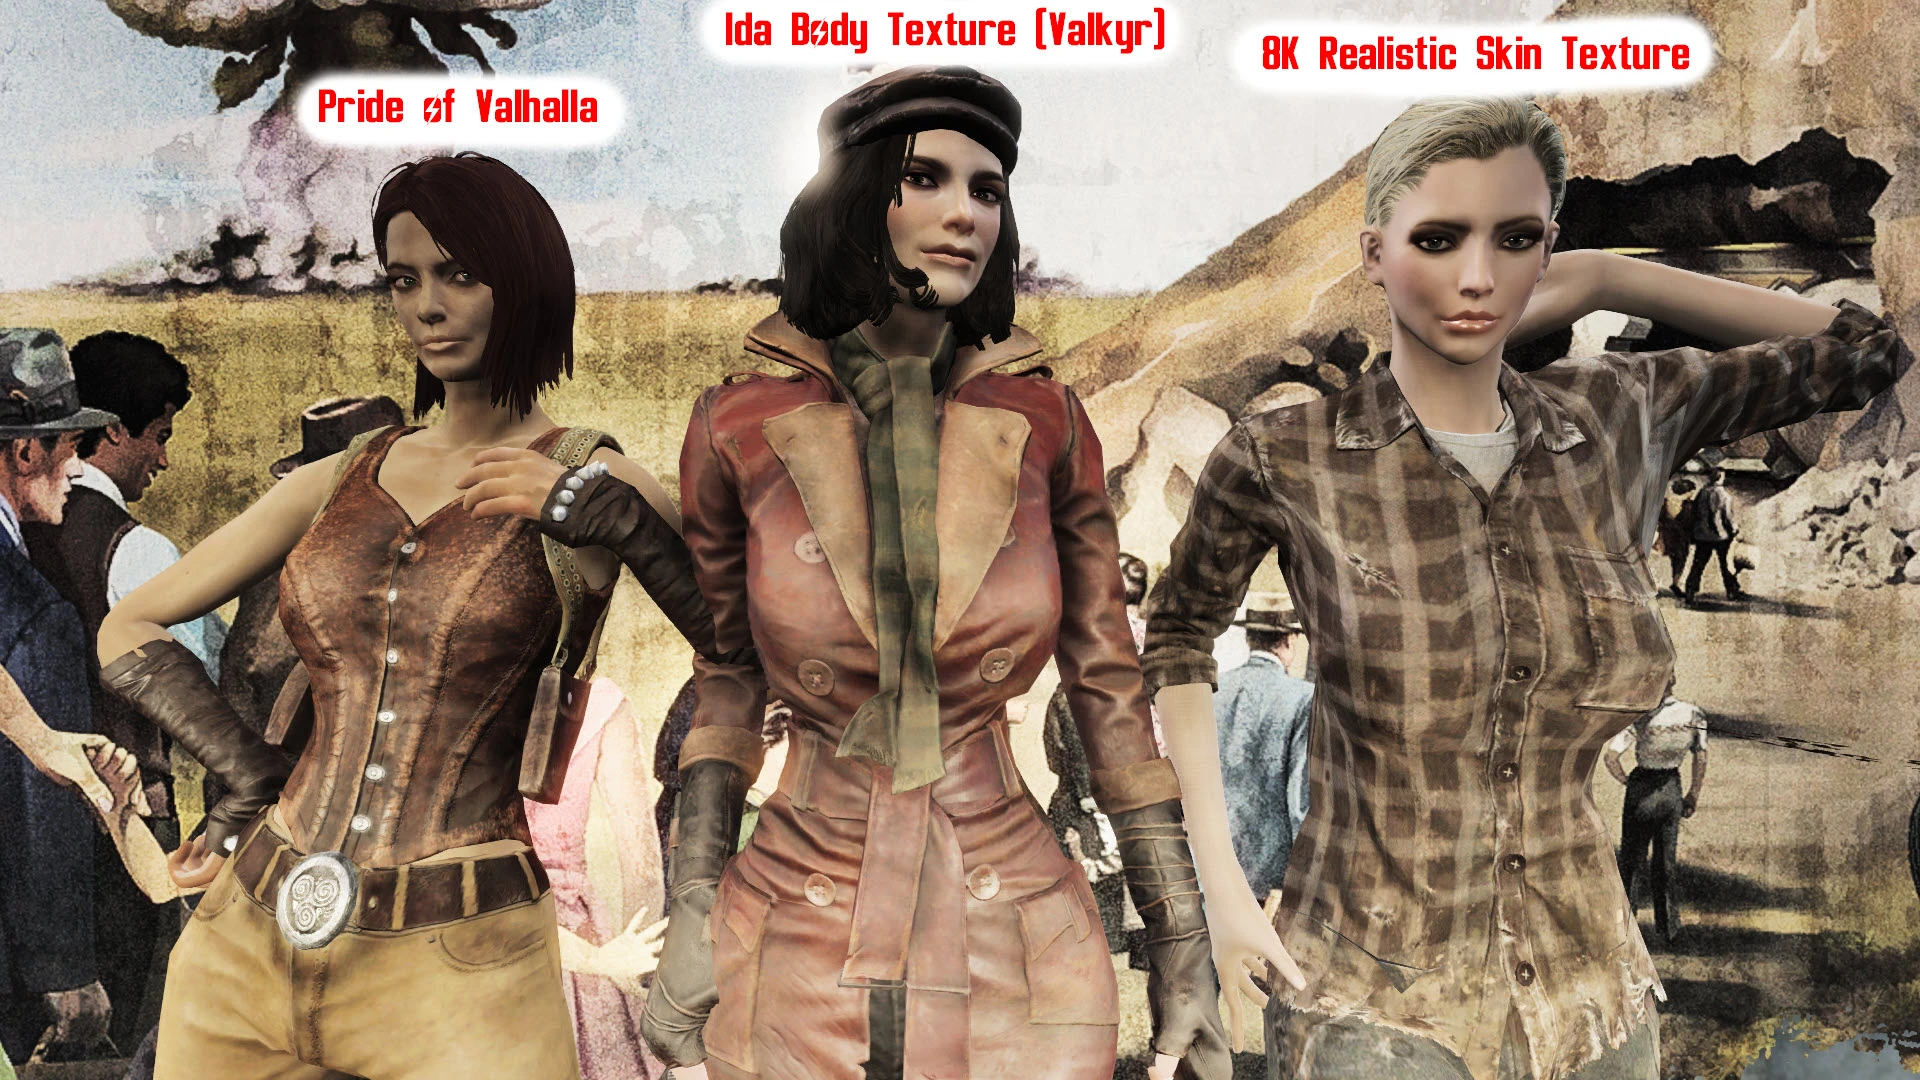 fallout 4 clothing mods makes skin texture out of alinment